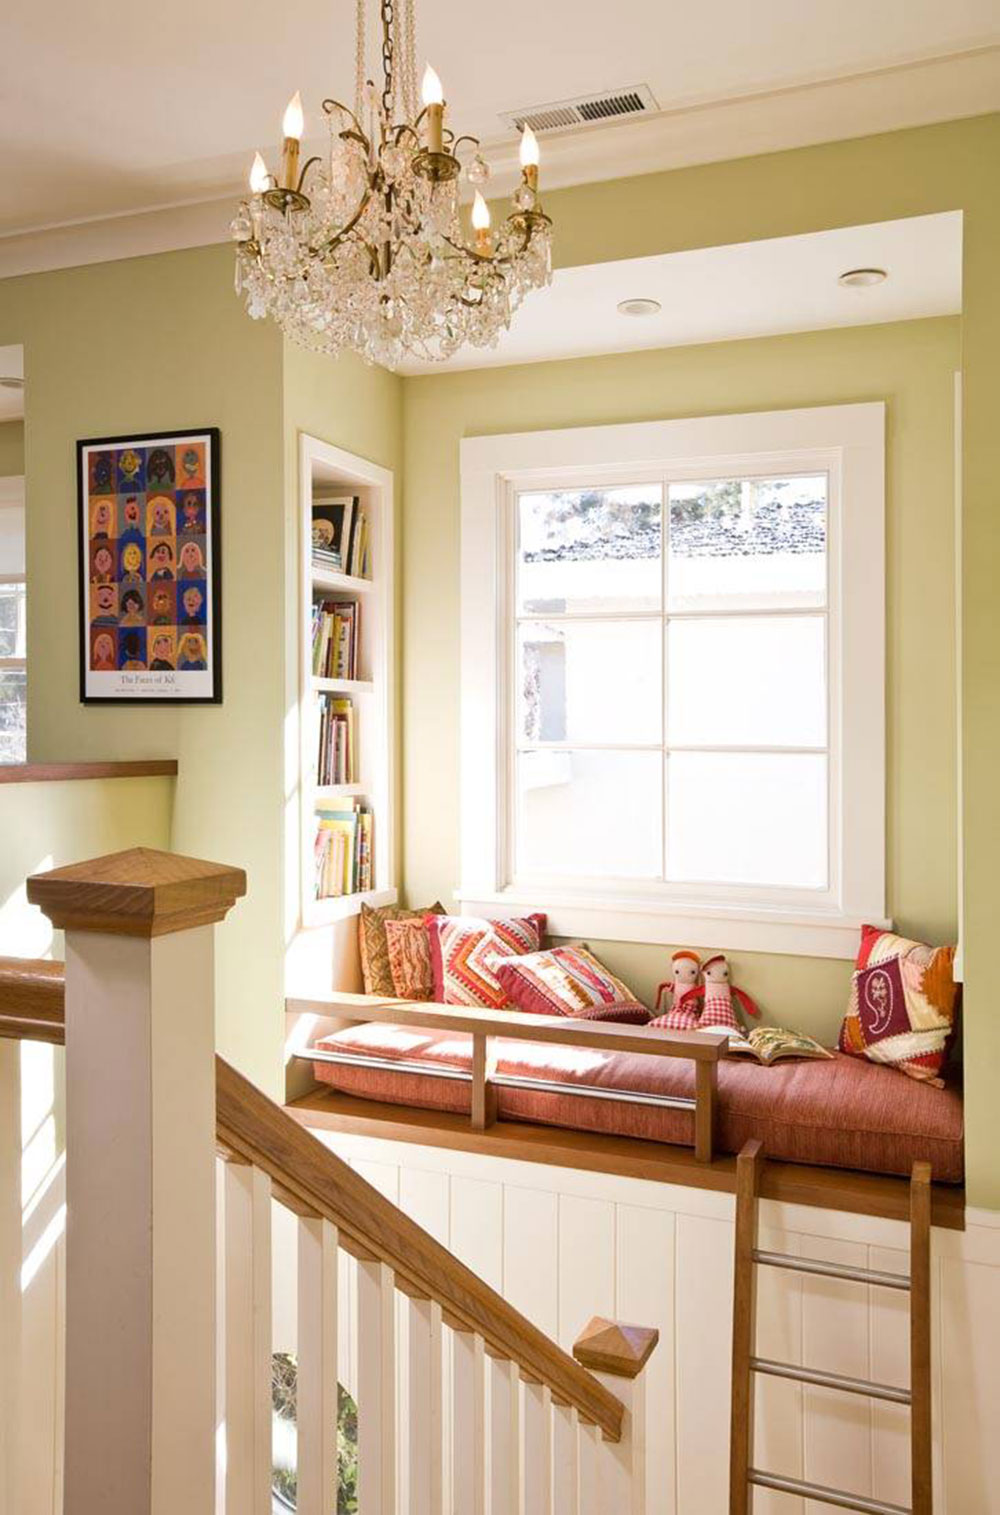 How To Design A Reading Nook For Poetic Moments9